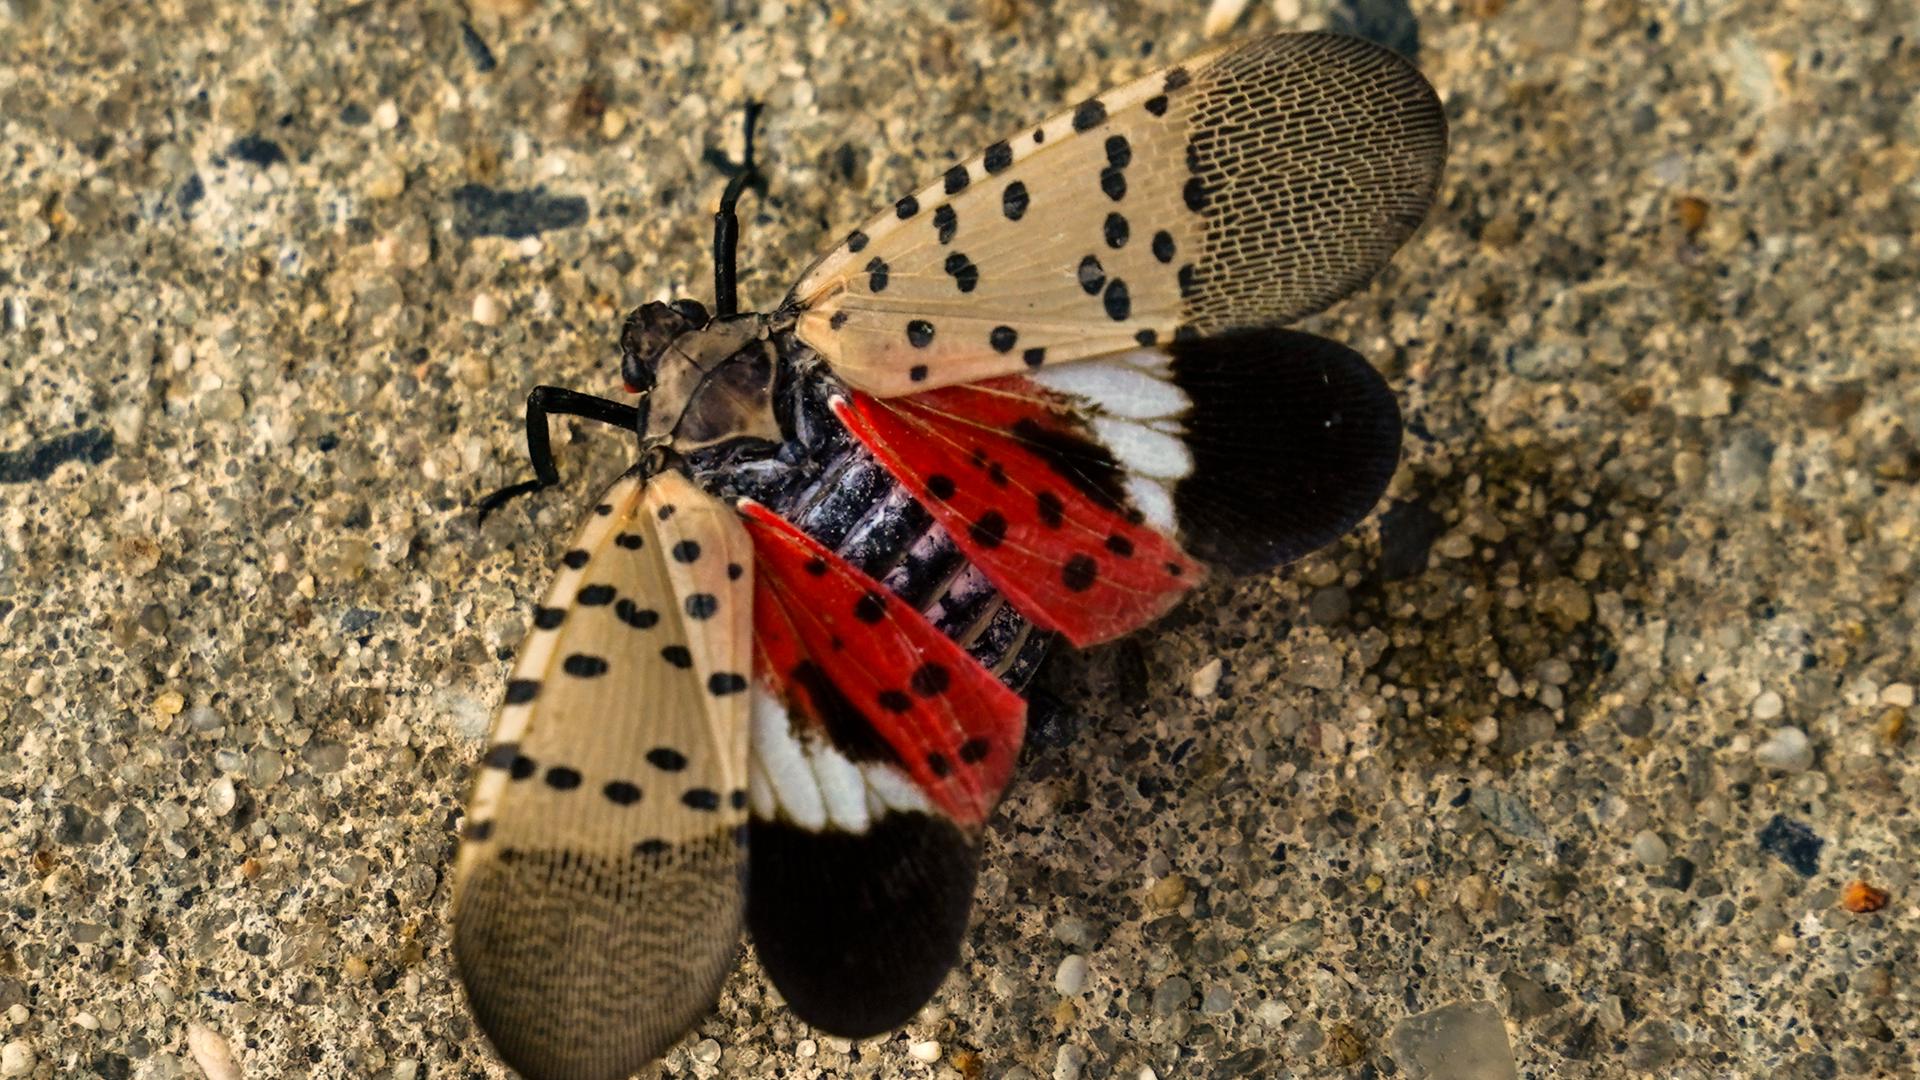 Spotted lanternflies feed on a variety of plants but love grape vines. California's grape industry produces more than 80 percent of wine in the U.S.